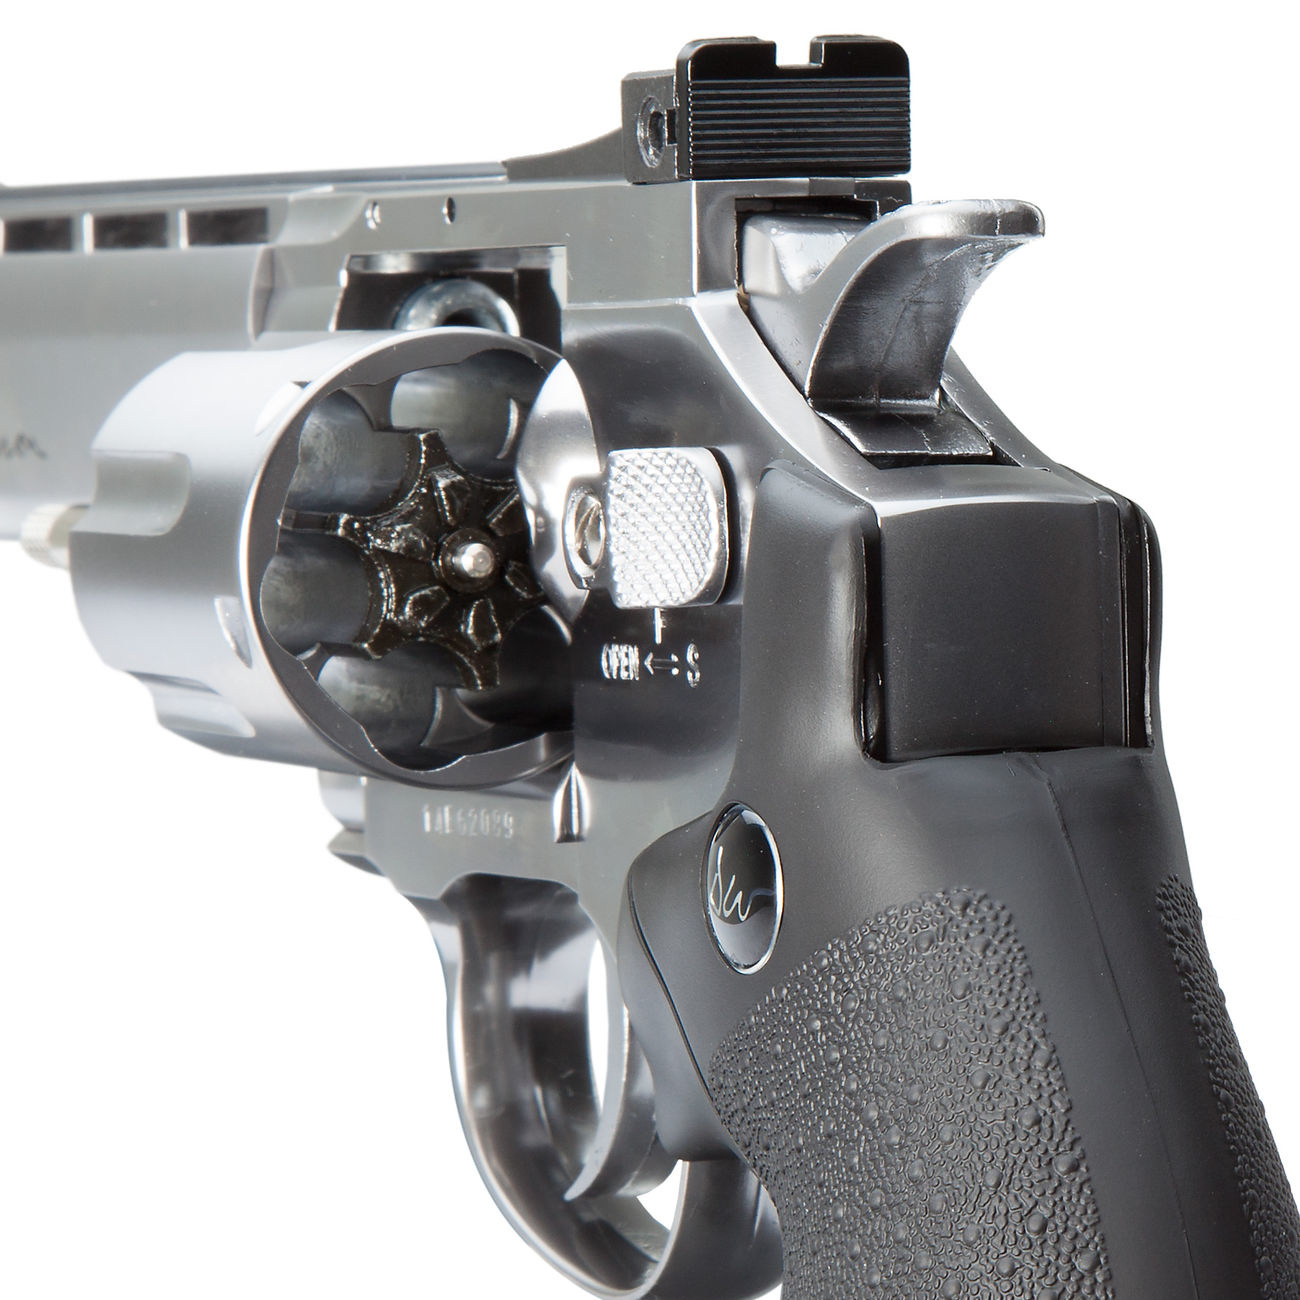 ASG 6 inch Dan Wesson Revolver Co2 NBB 1.90 Joule - Silver